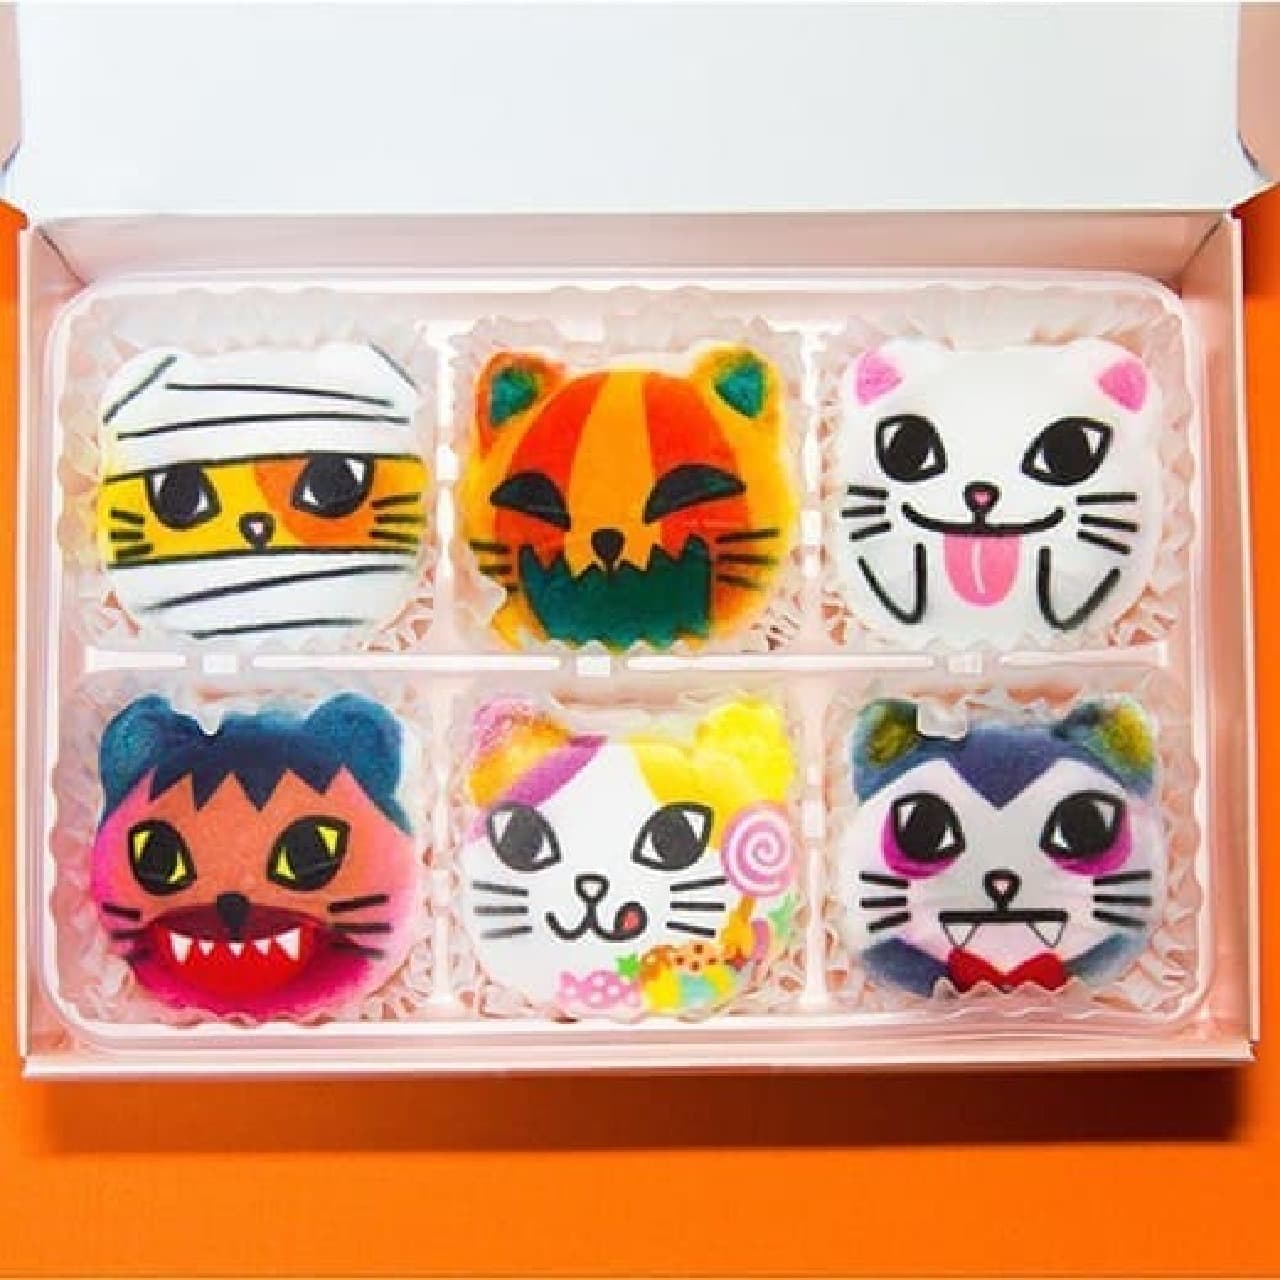 "Halloween Nyasumaro 6 pieces", which cats dressed as Jack O Lanterns and mummies, is now on sale